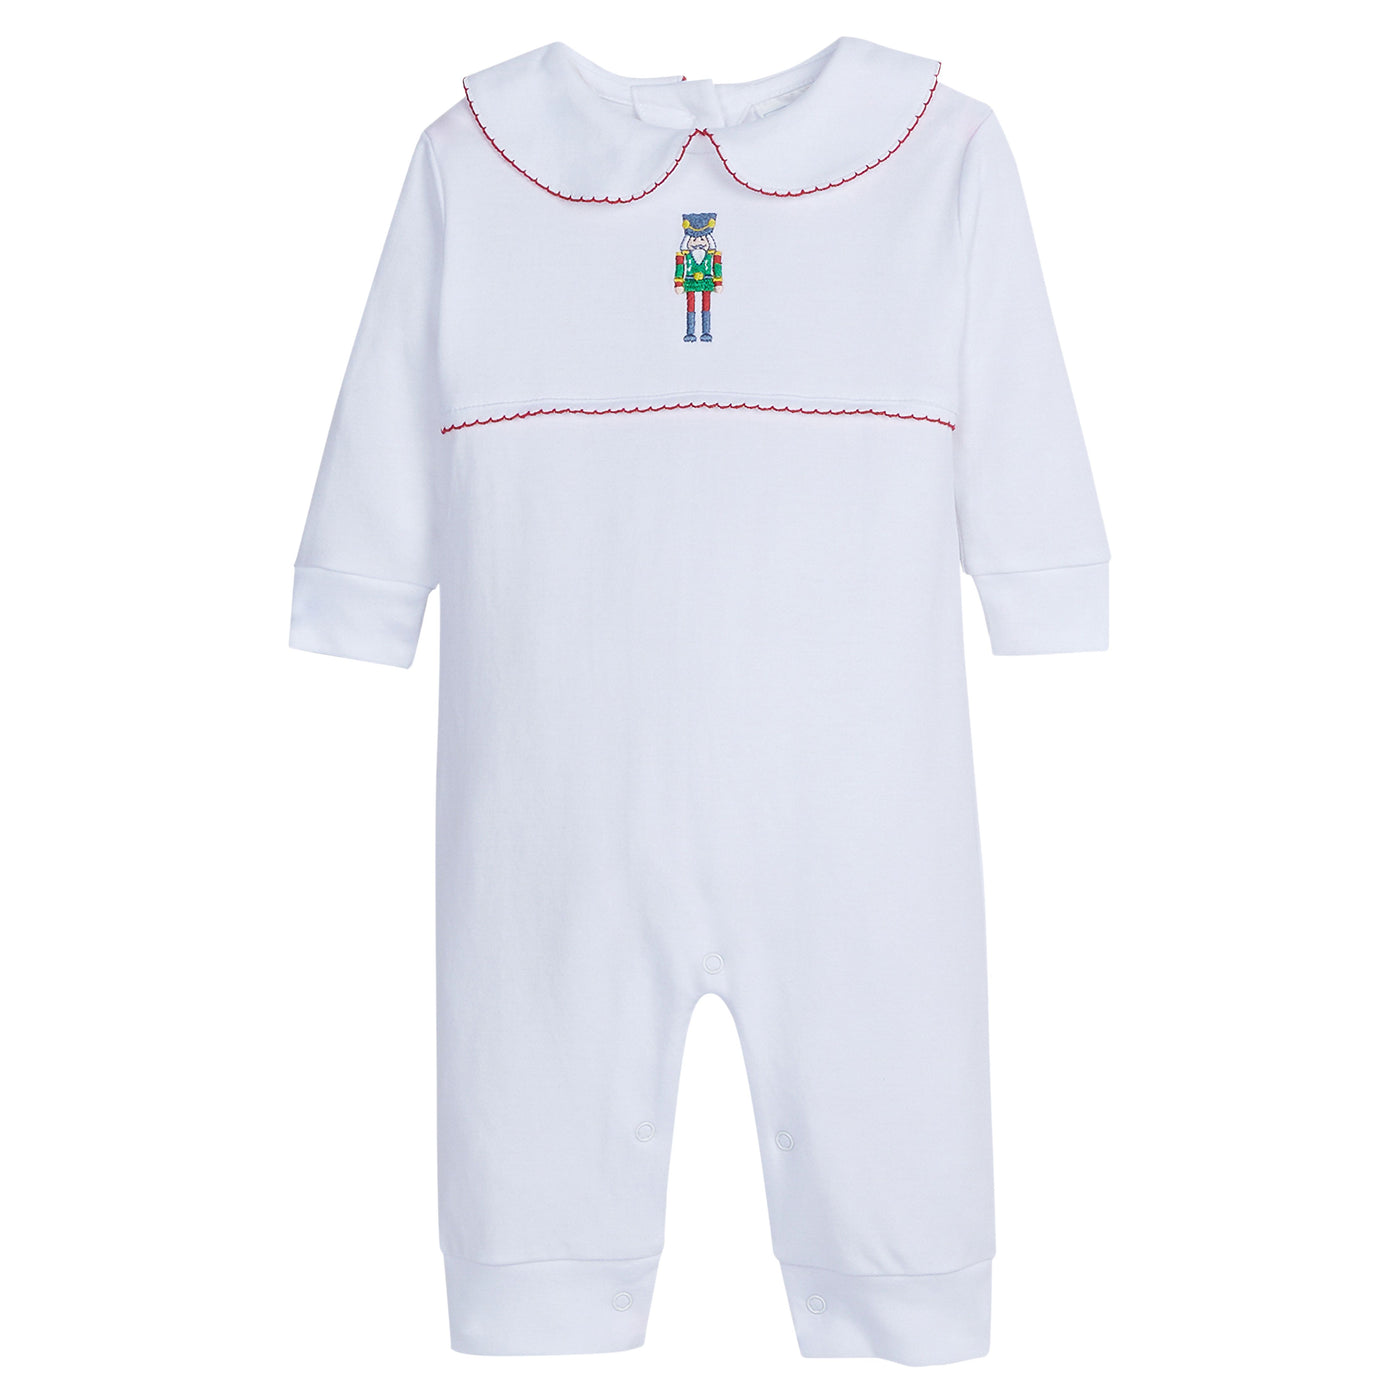 Embroidered Playsuit - Nutcracker